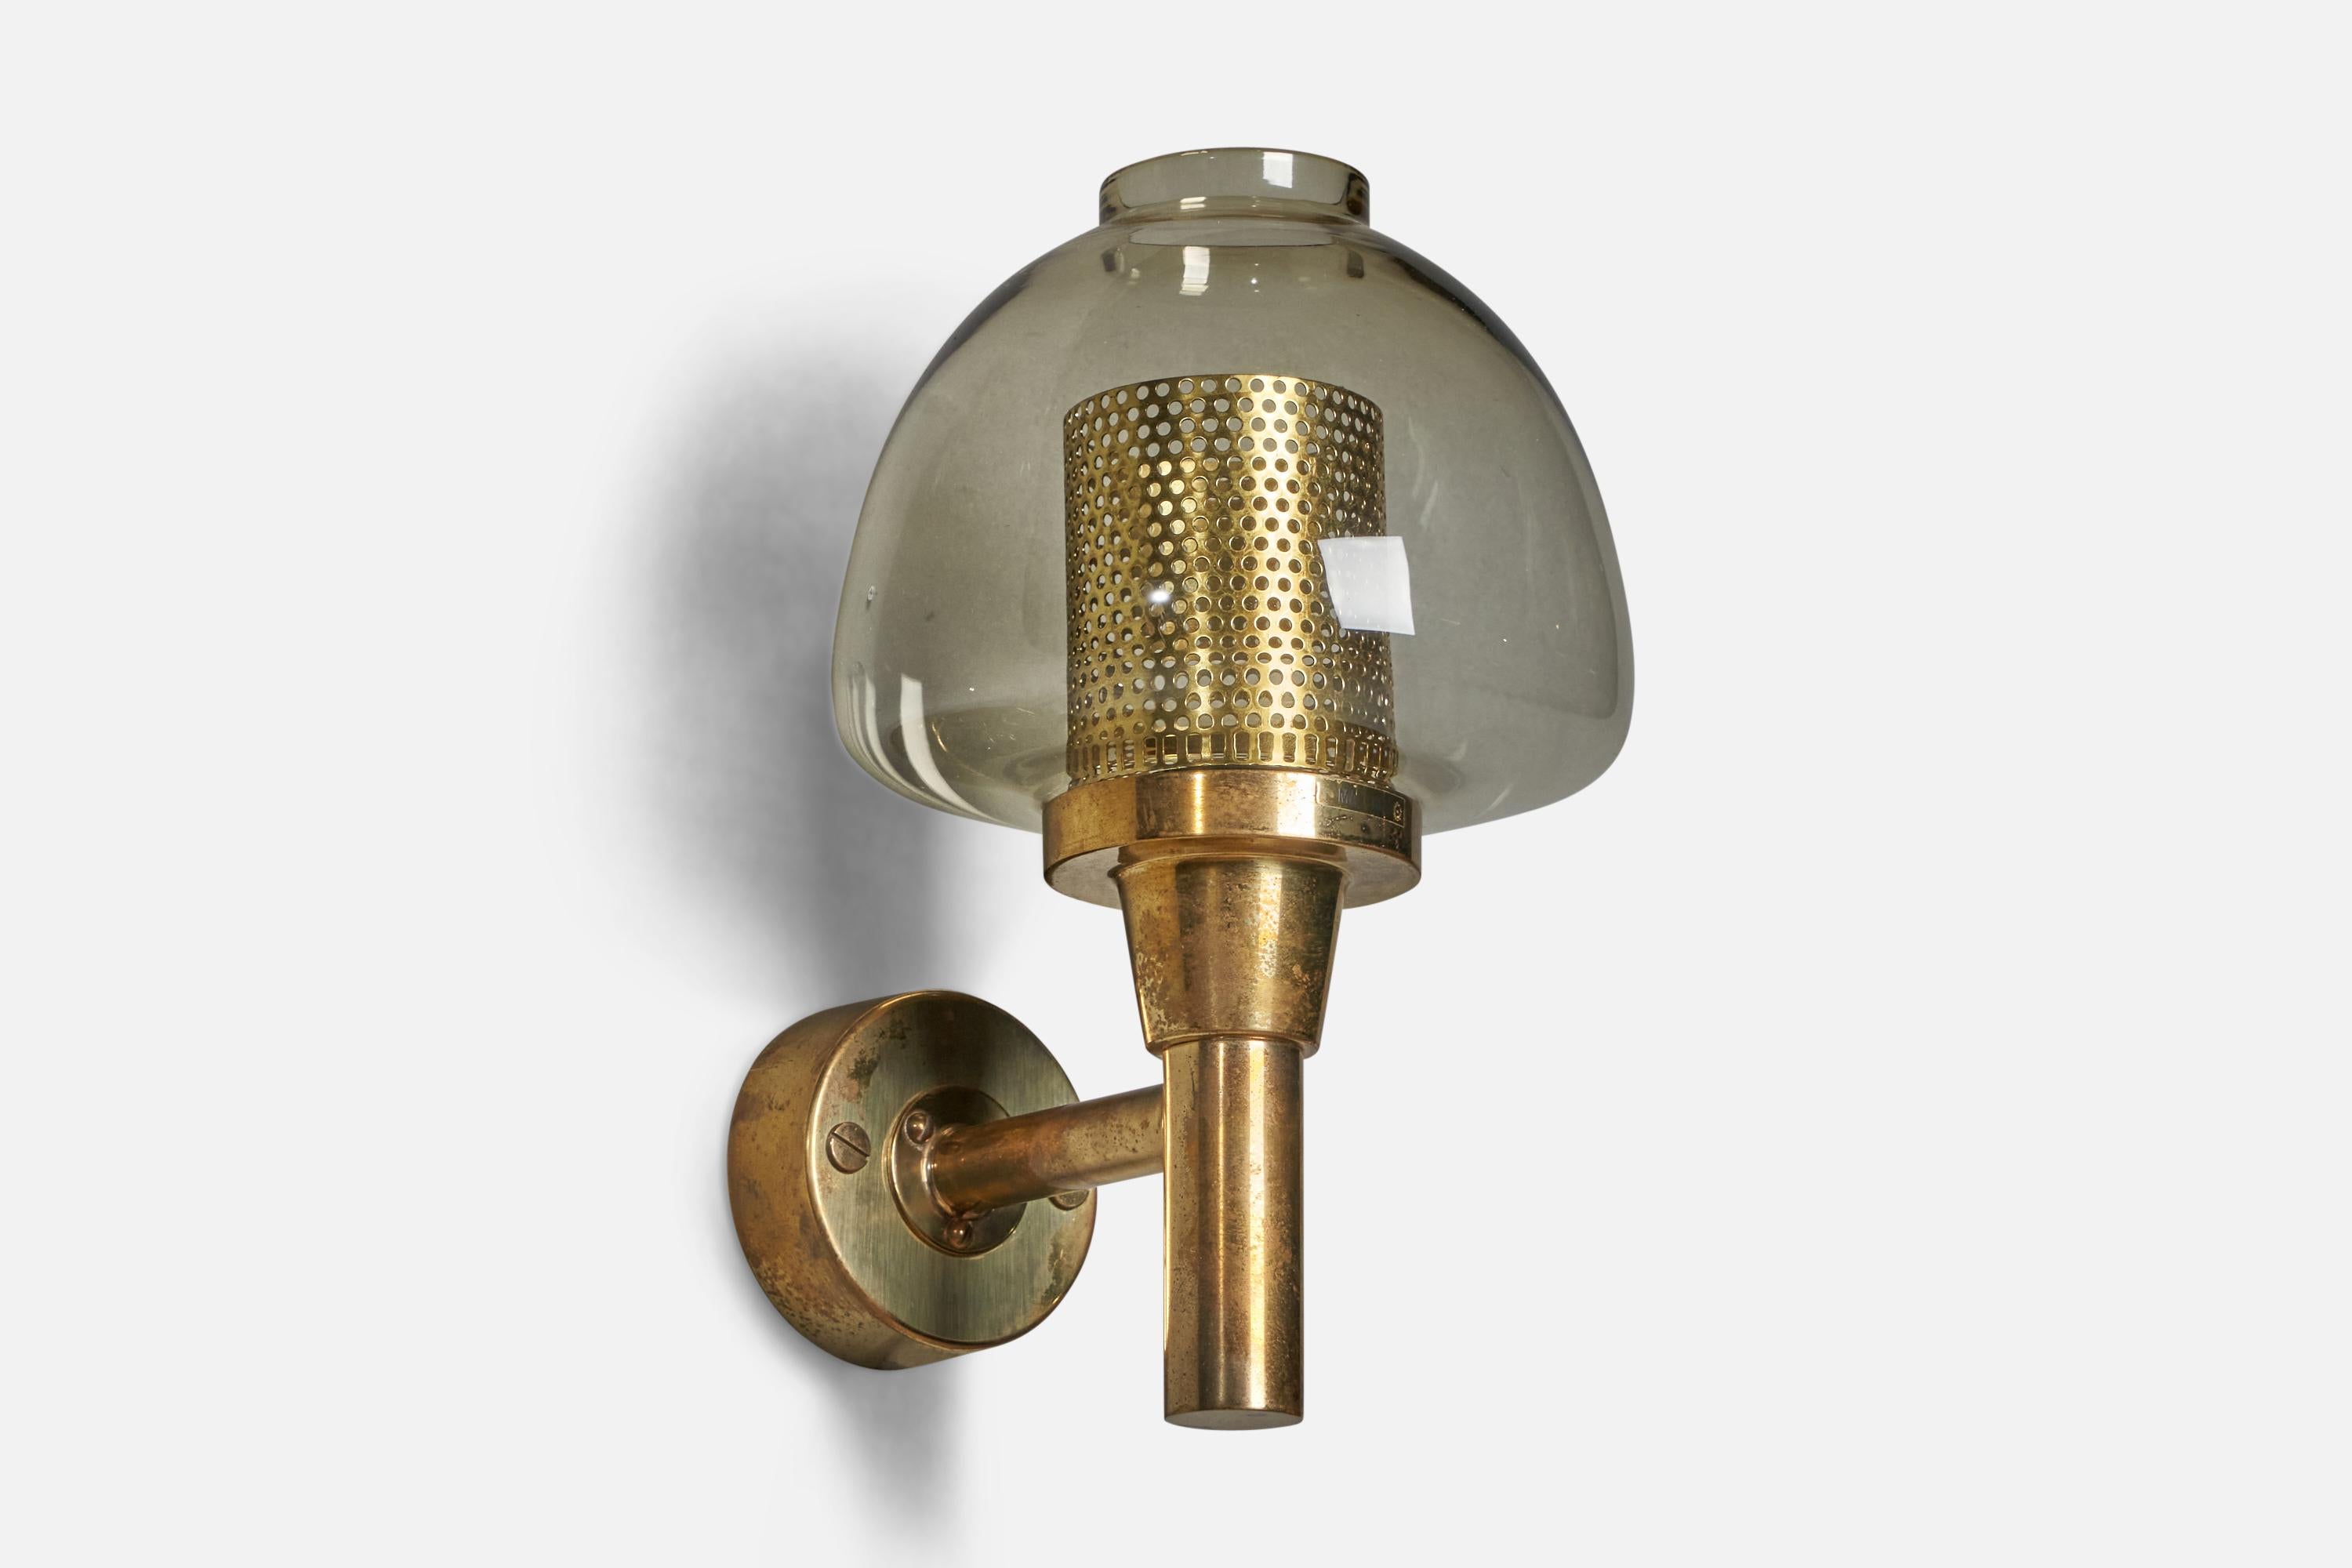 A brass and glass wall light designed and produced by Hans-Agne Jakobsson, Markaryd, Sweden, 1960s.
Overall Dimensions (inches): 11” H x 7” W x 8.5” D
Back Plate Dimensions (inches): 3” Diameter
Bulb Specifications: E-26 Bulb
Number of Sockets: 1